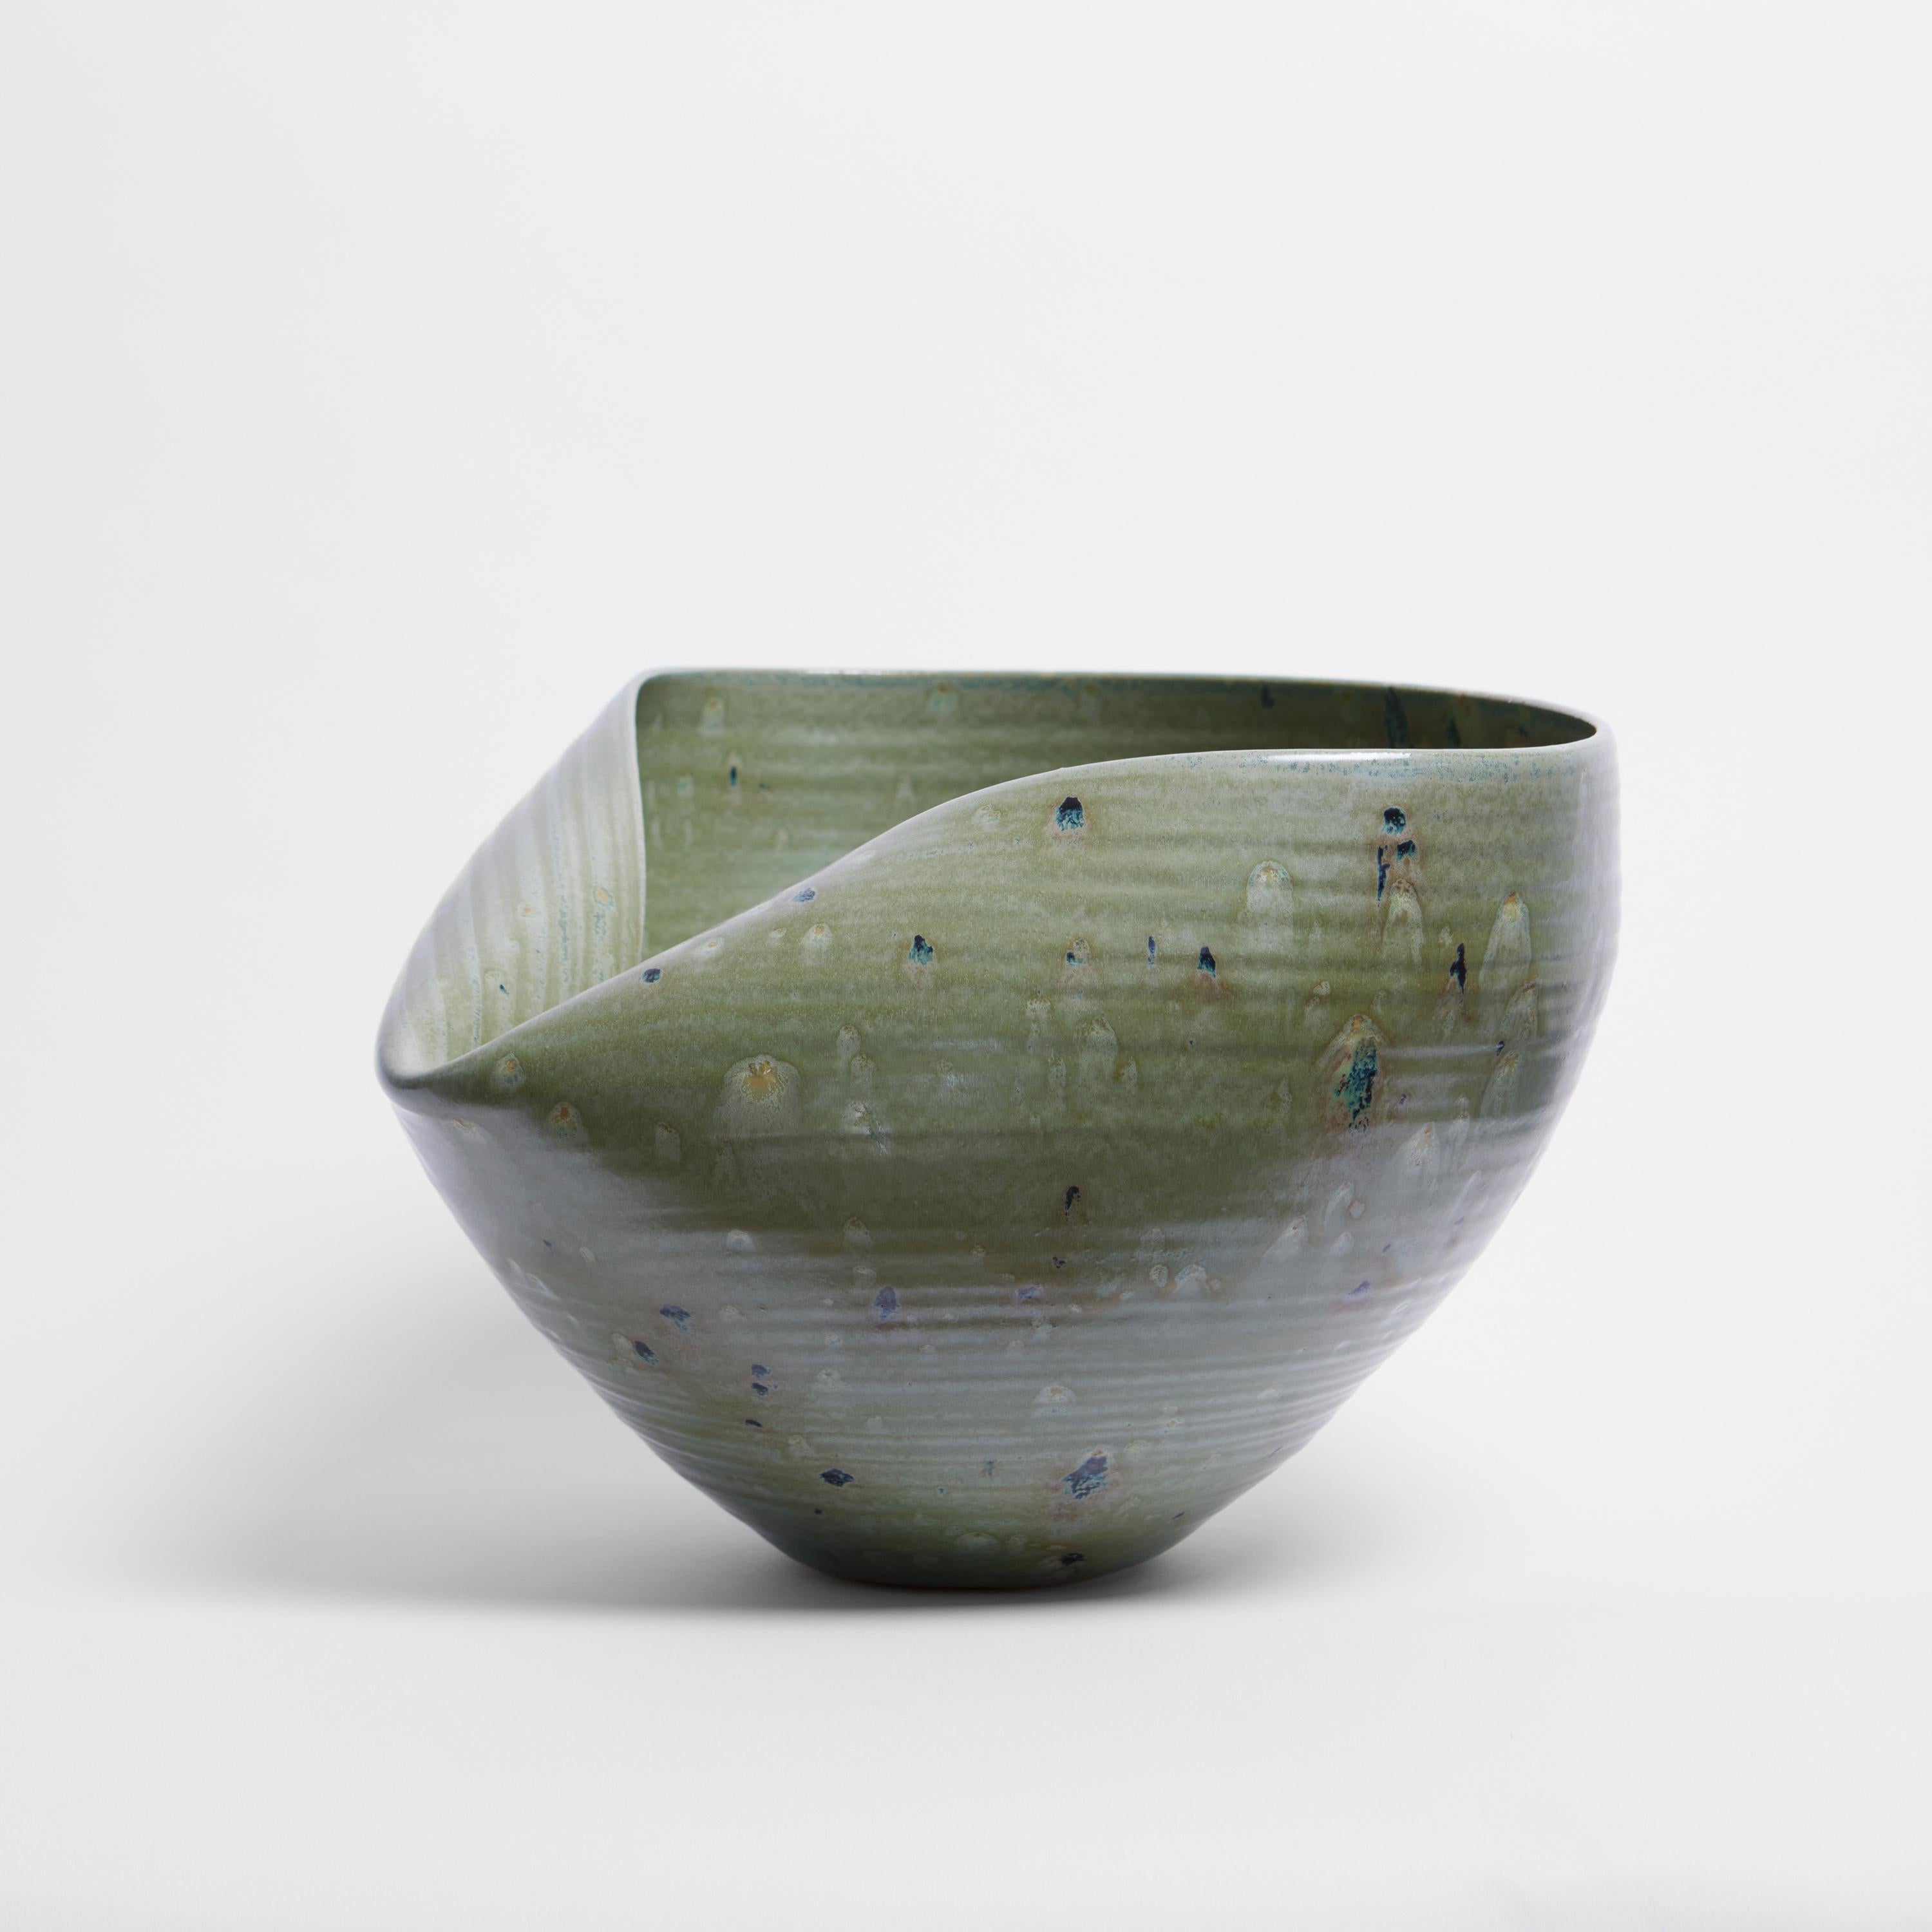 Vessel from ceramic artist Nicholas Arroyave-Portela.

No. 104 Medium large green collapsed open form (Vessel, Interior sculpture, not suitable for holding water)

White St.Thomas clay, Stoneware glazes, multi fired to cone 6 (1223 degrees)

Made in